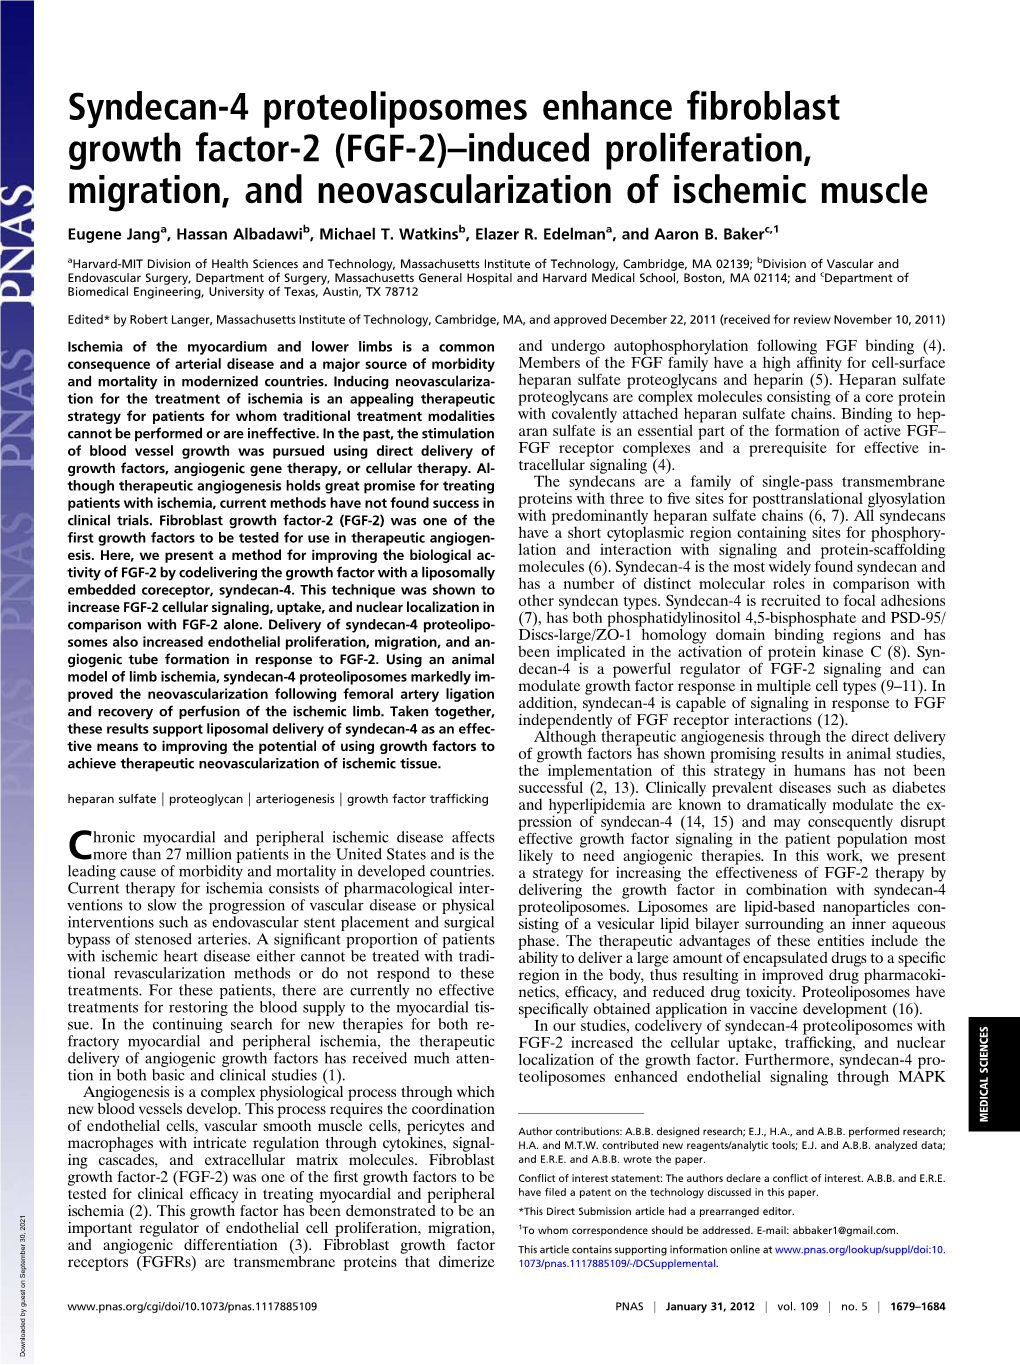 FGF-2)–Induced Proliferation, Migration, and Neovascularization of Ischemic Muscle